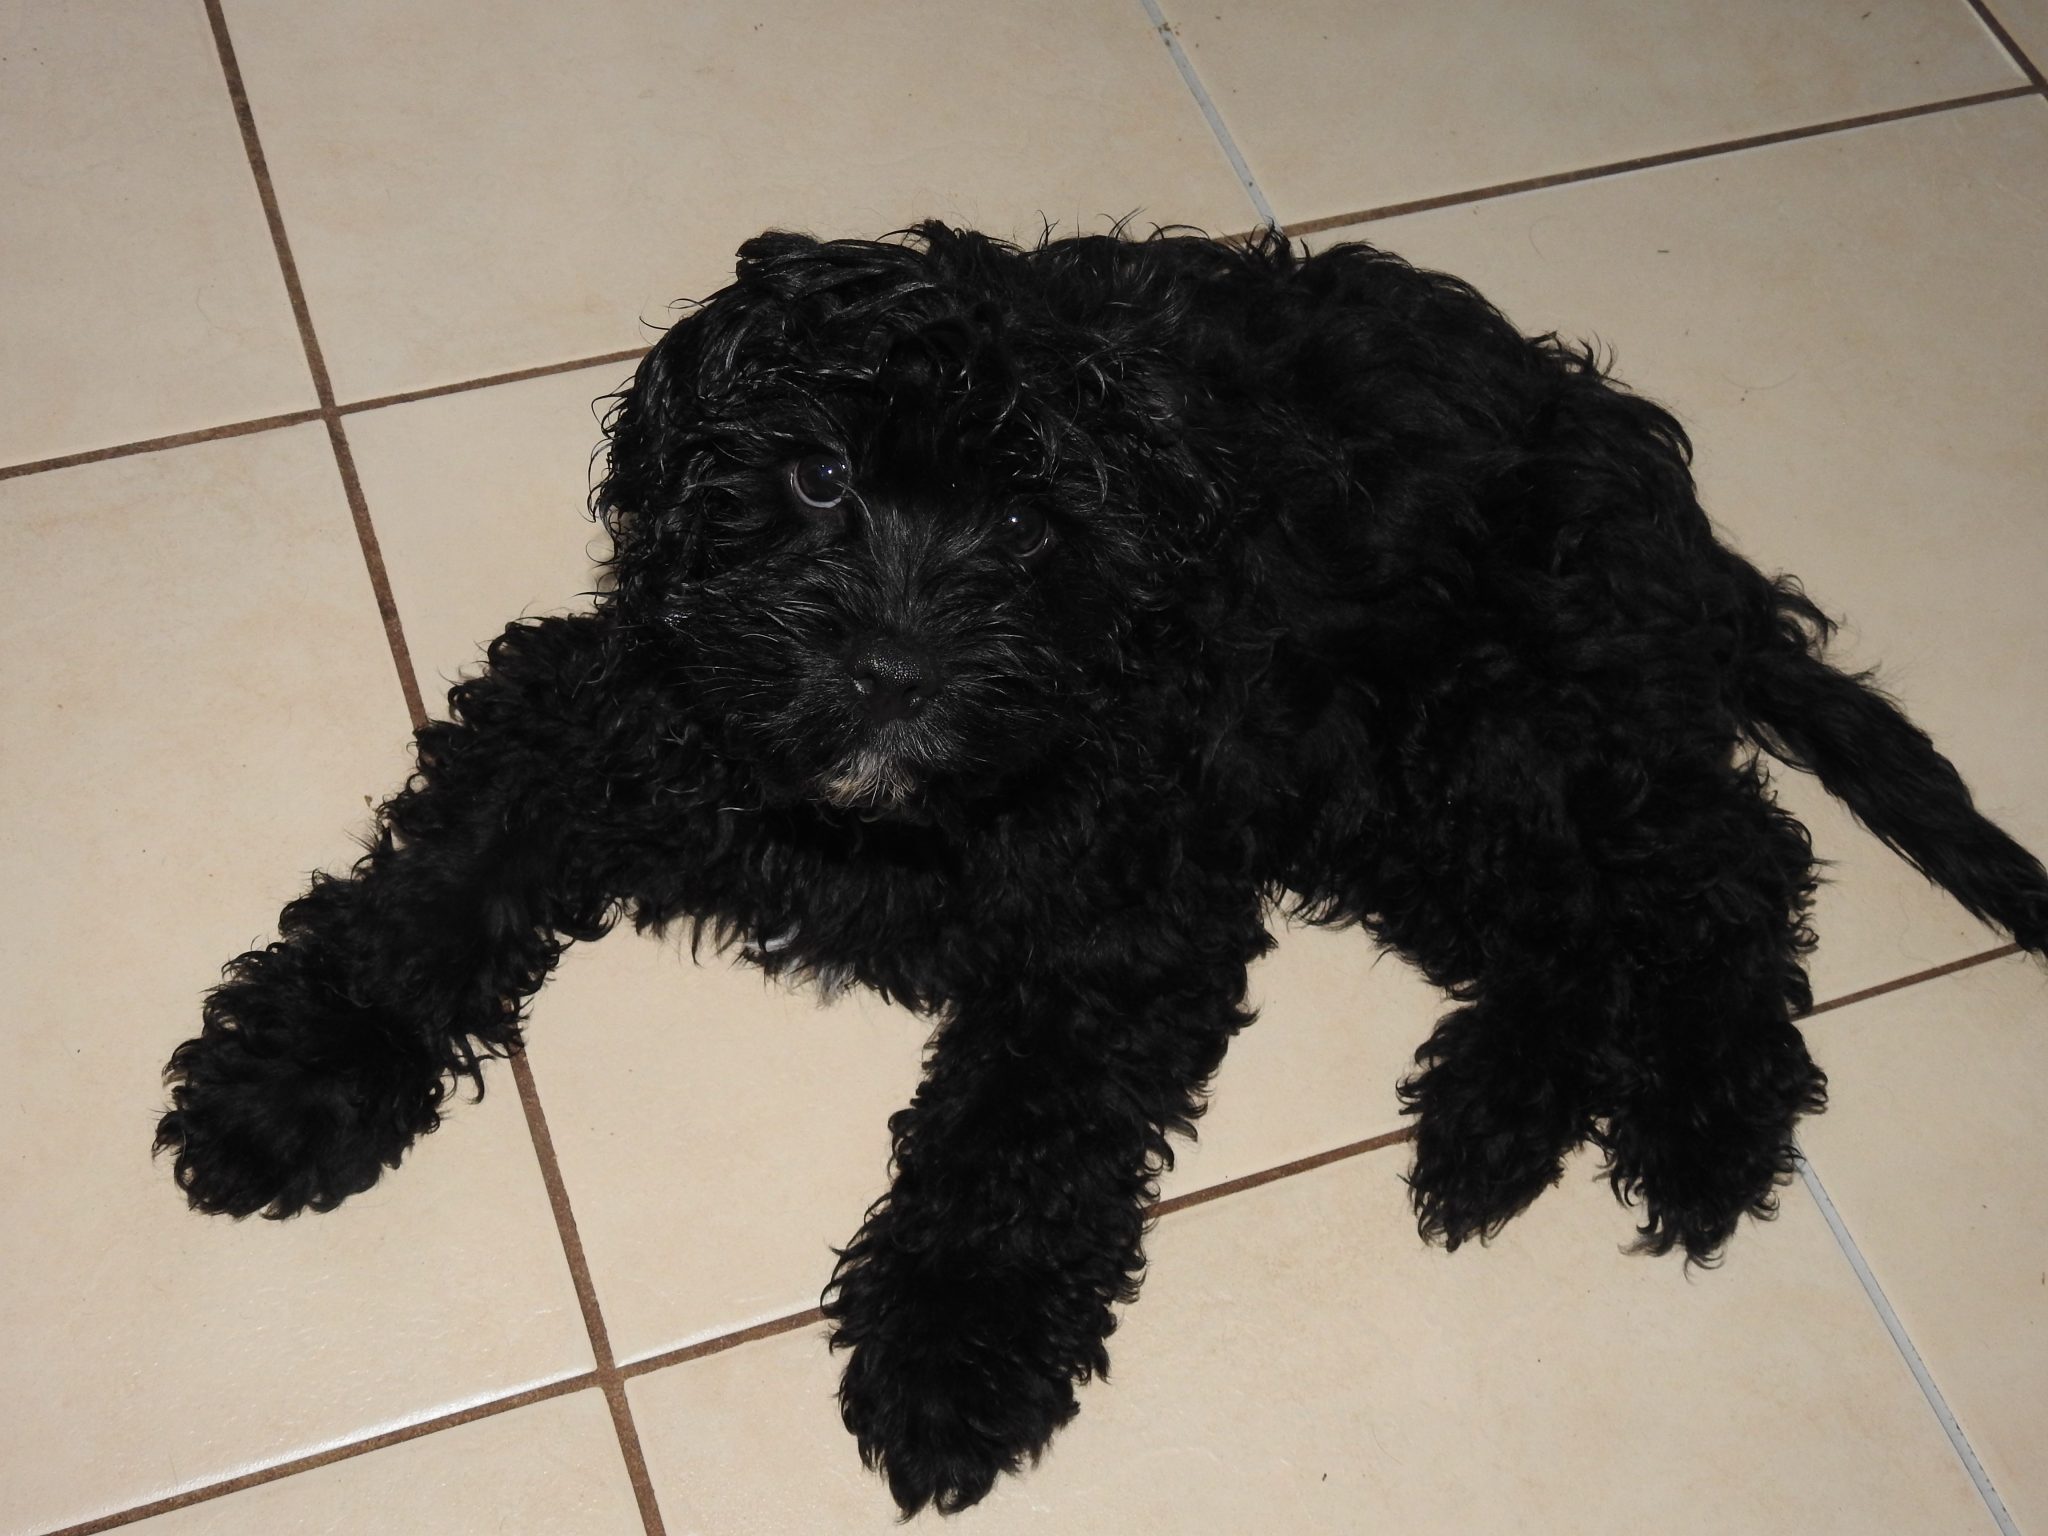 Two x F1 Cavoodle Puppies. Maryborough Qld